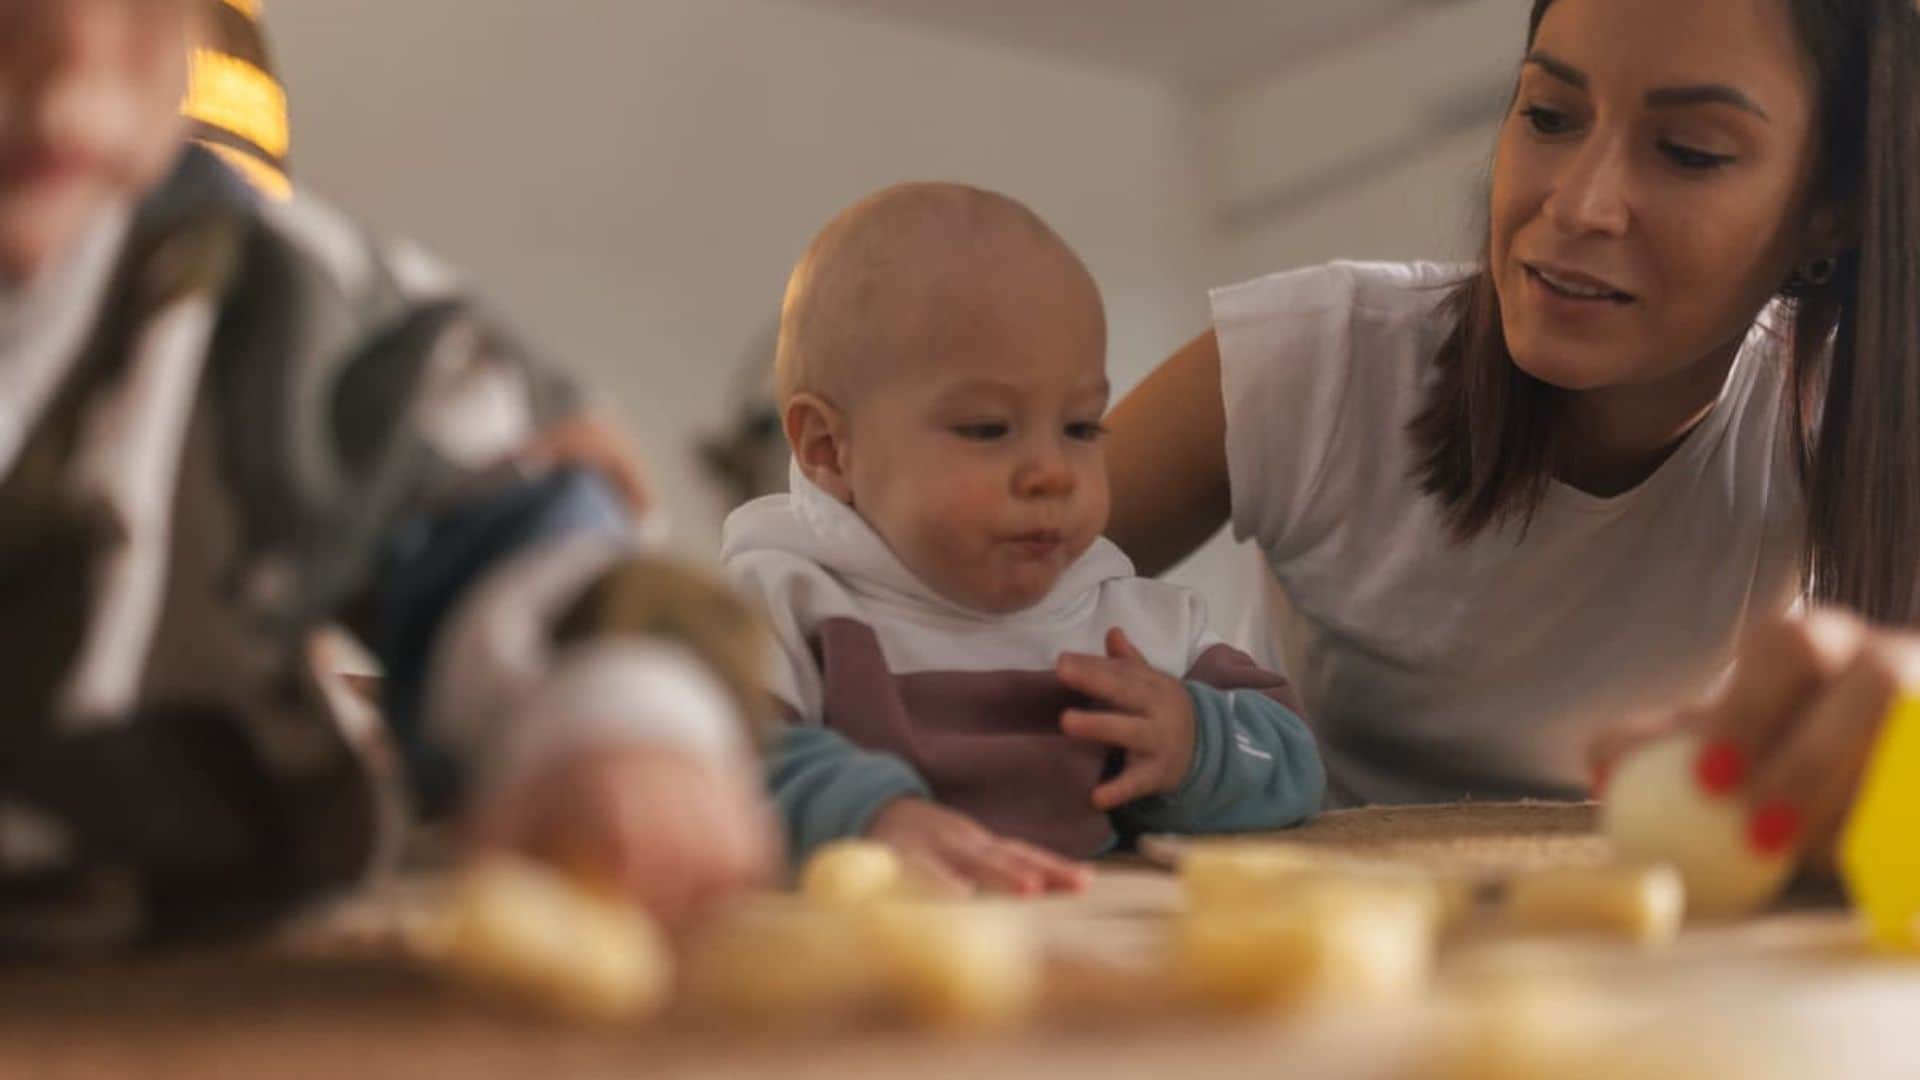 The riskiest foods for your baby: What parents need to know about safety and nutrition